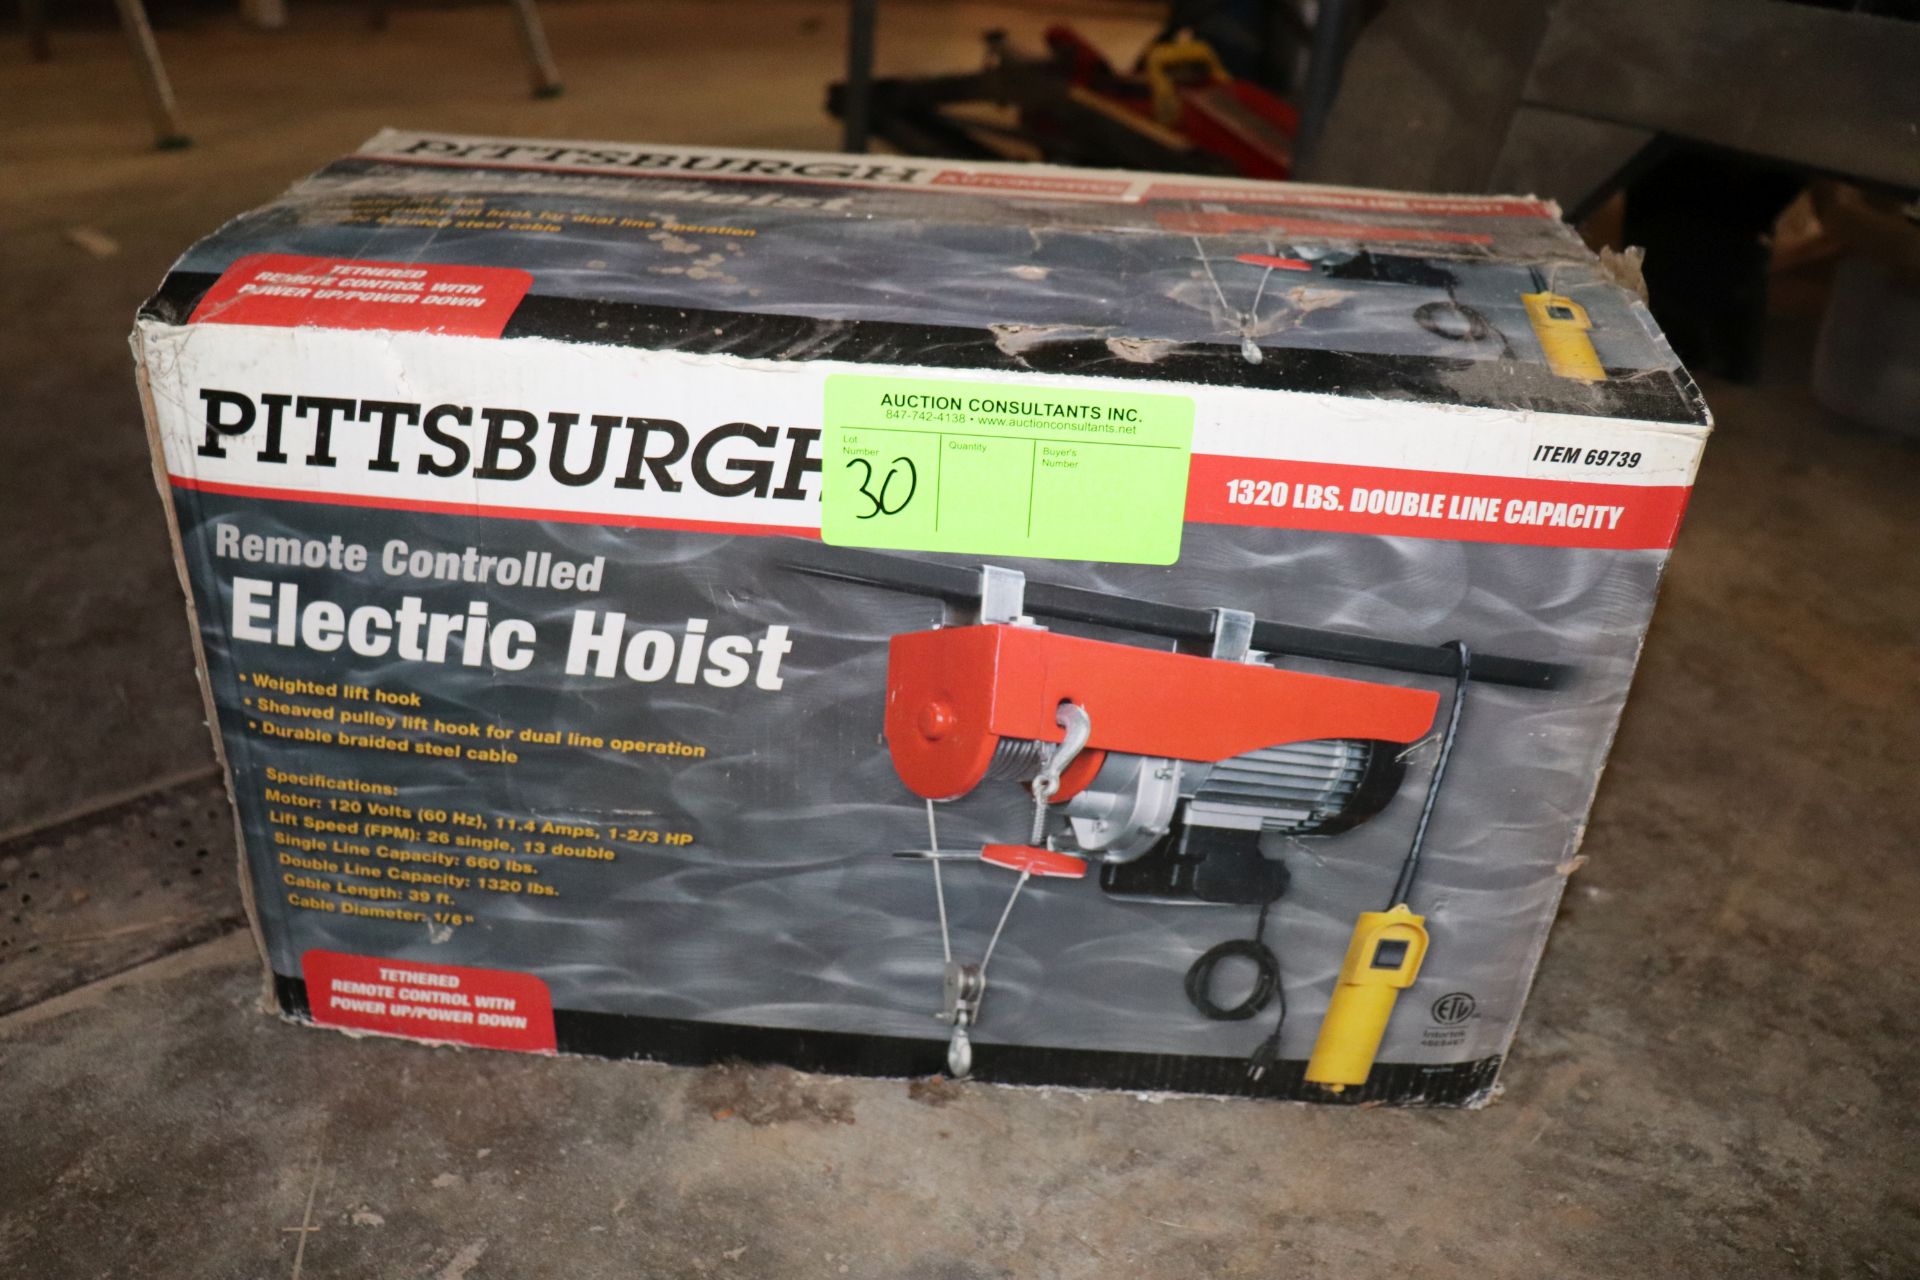 Pittsburgh remote control electric hoist, 1,320 lbs, new in box